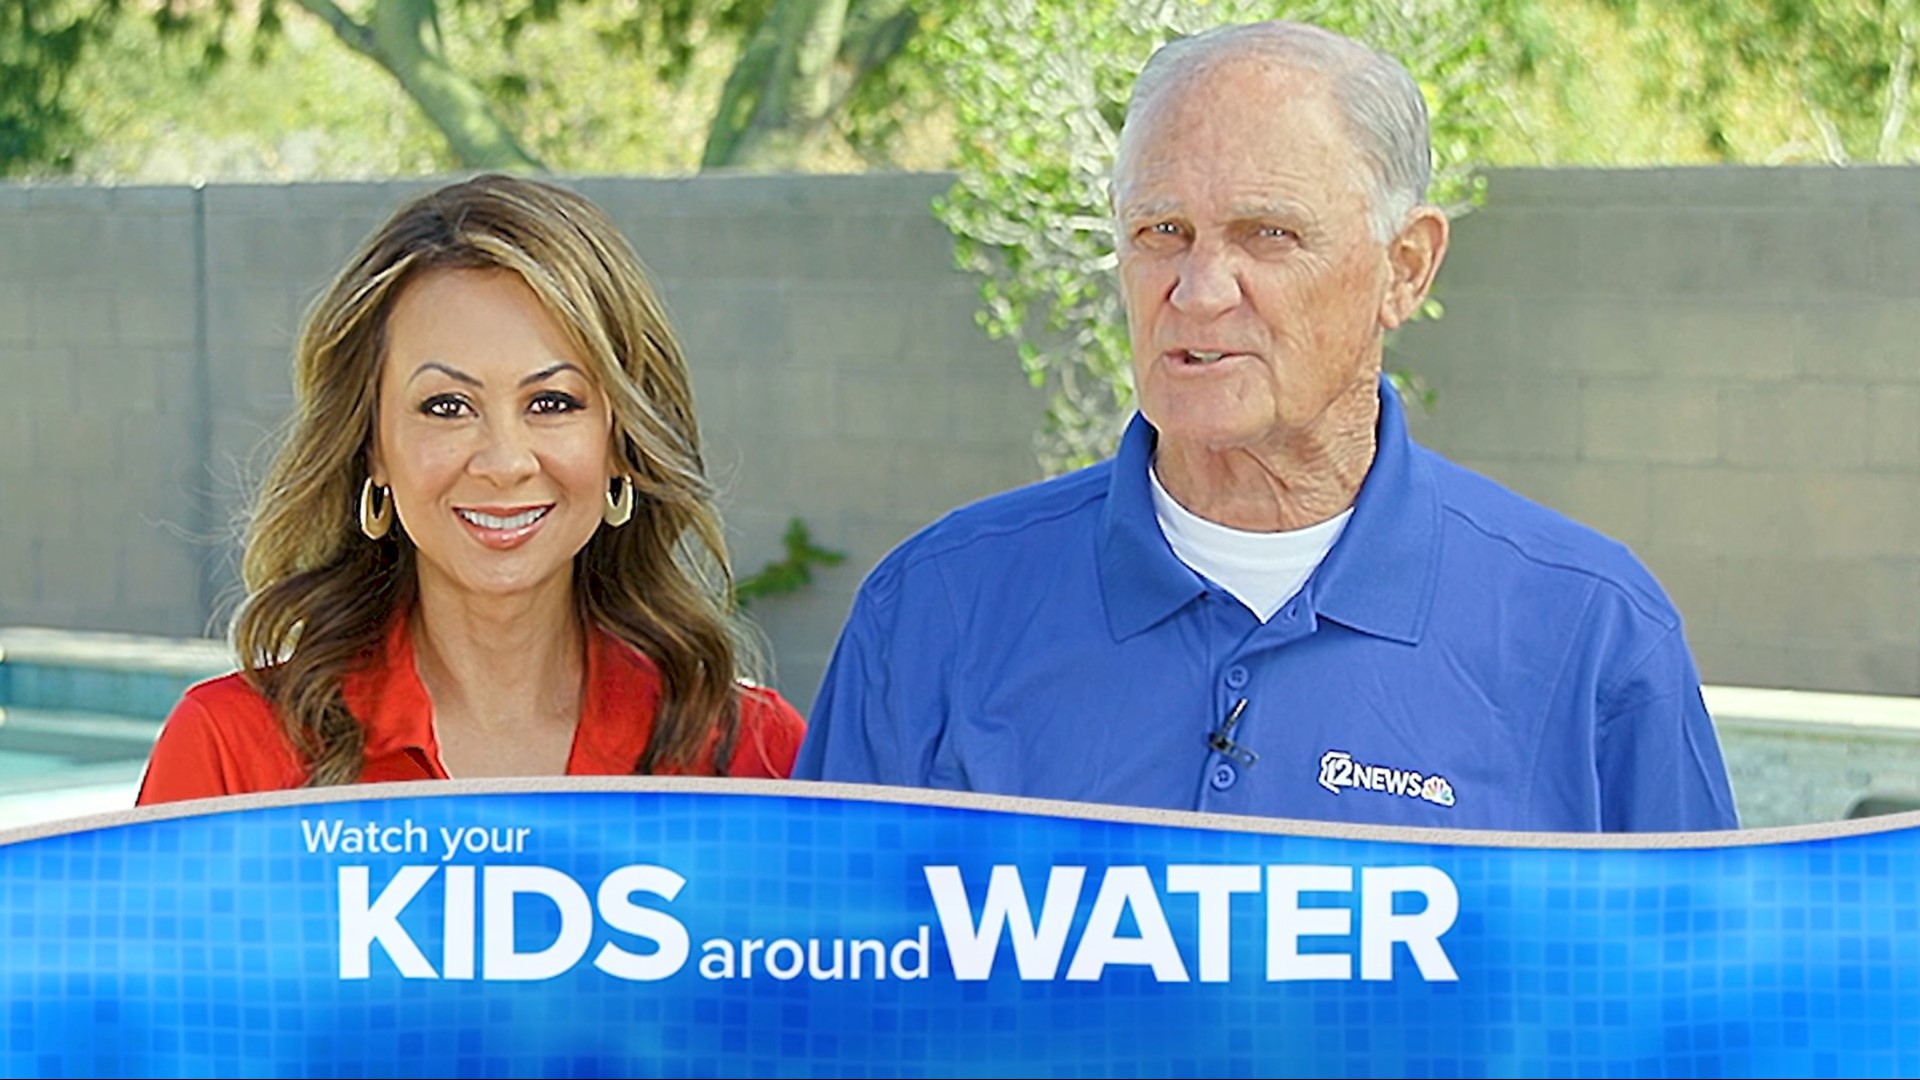 Join 12News and Dave Munsey for water safety tips beginning in January.